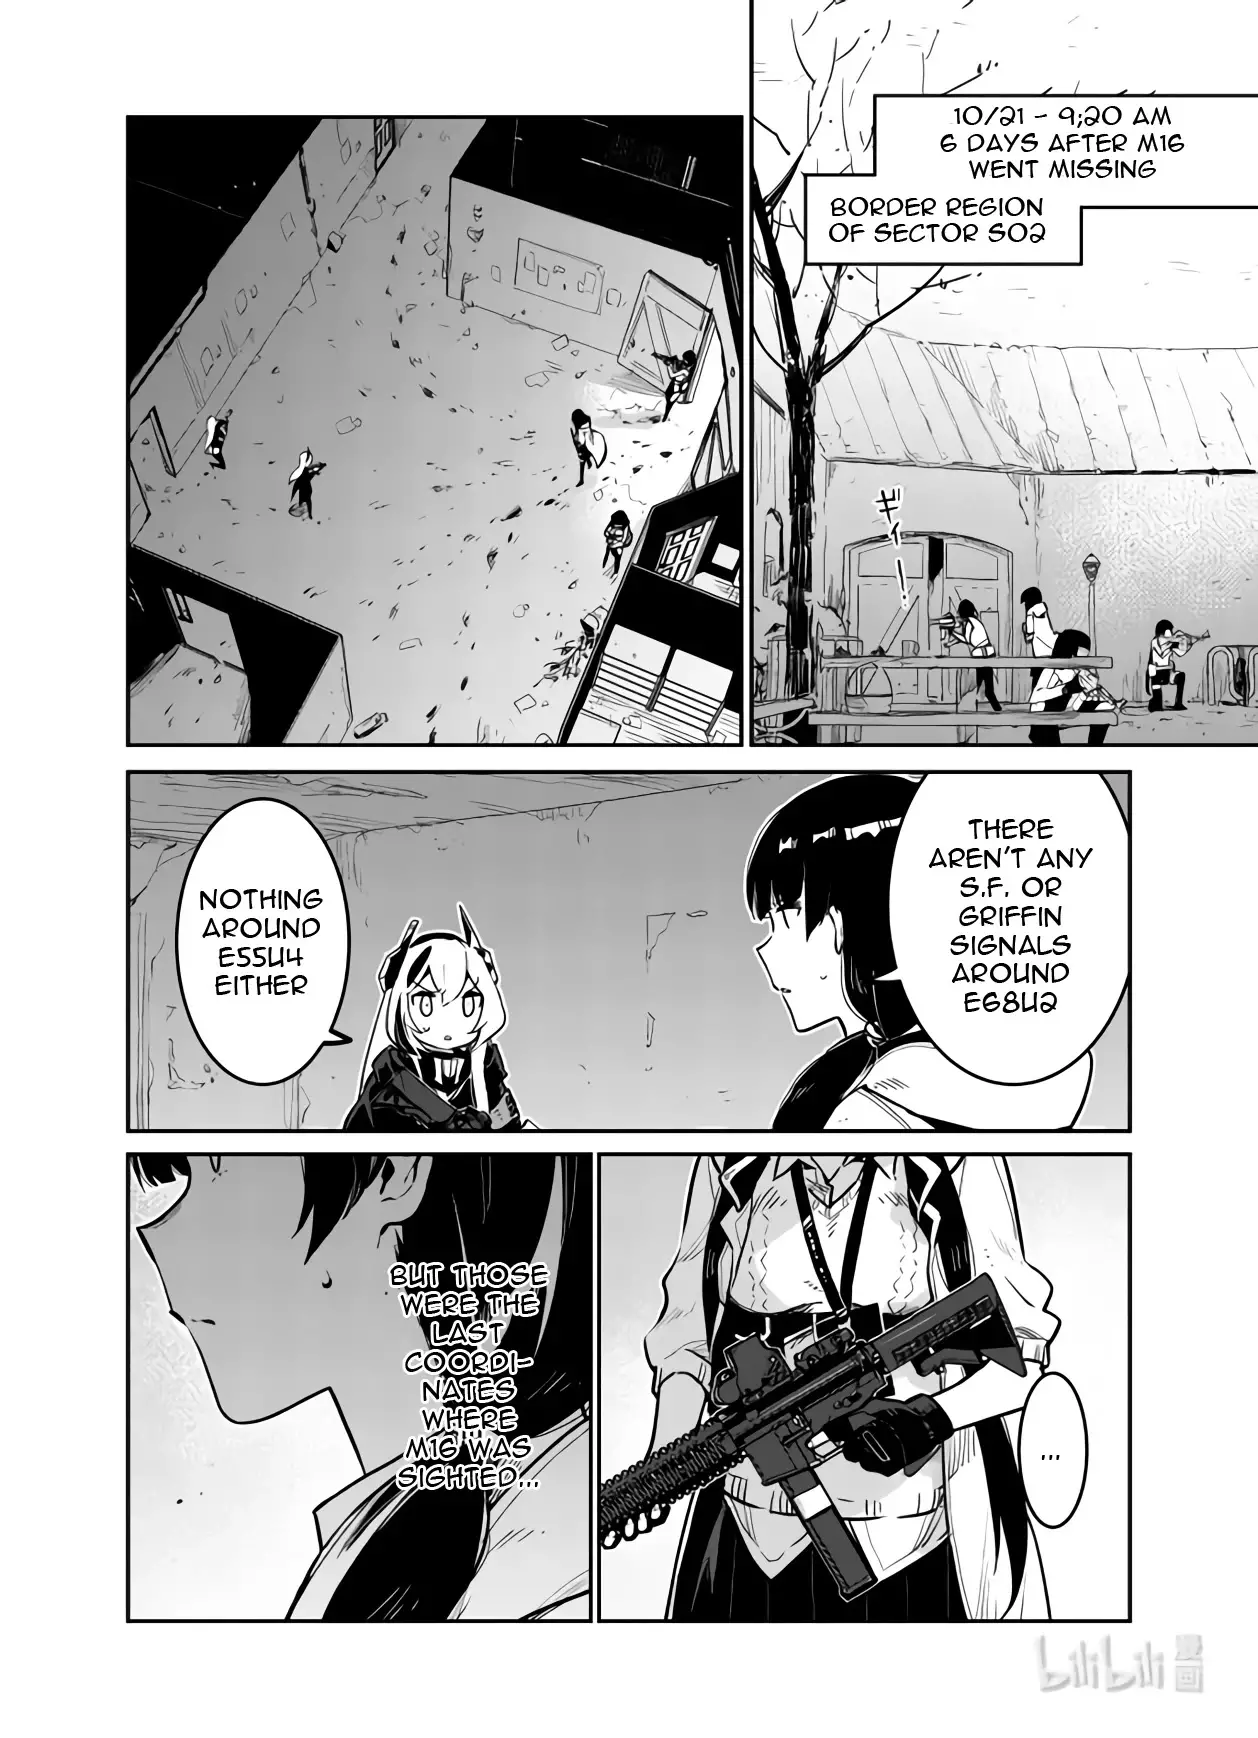 Girls' Frontline - 33 page 2-5d21f57a